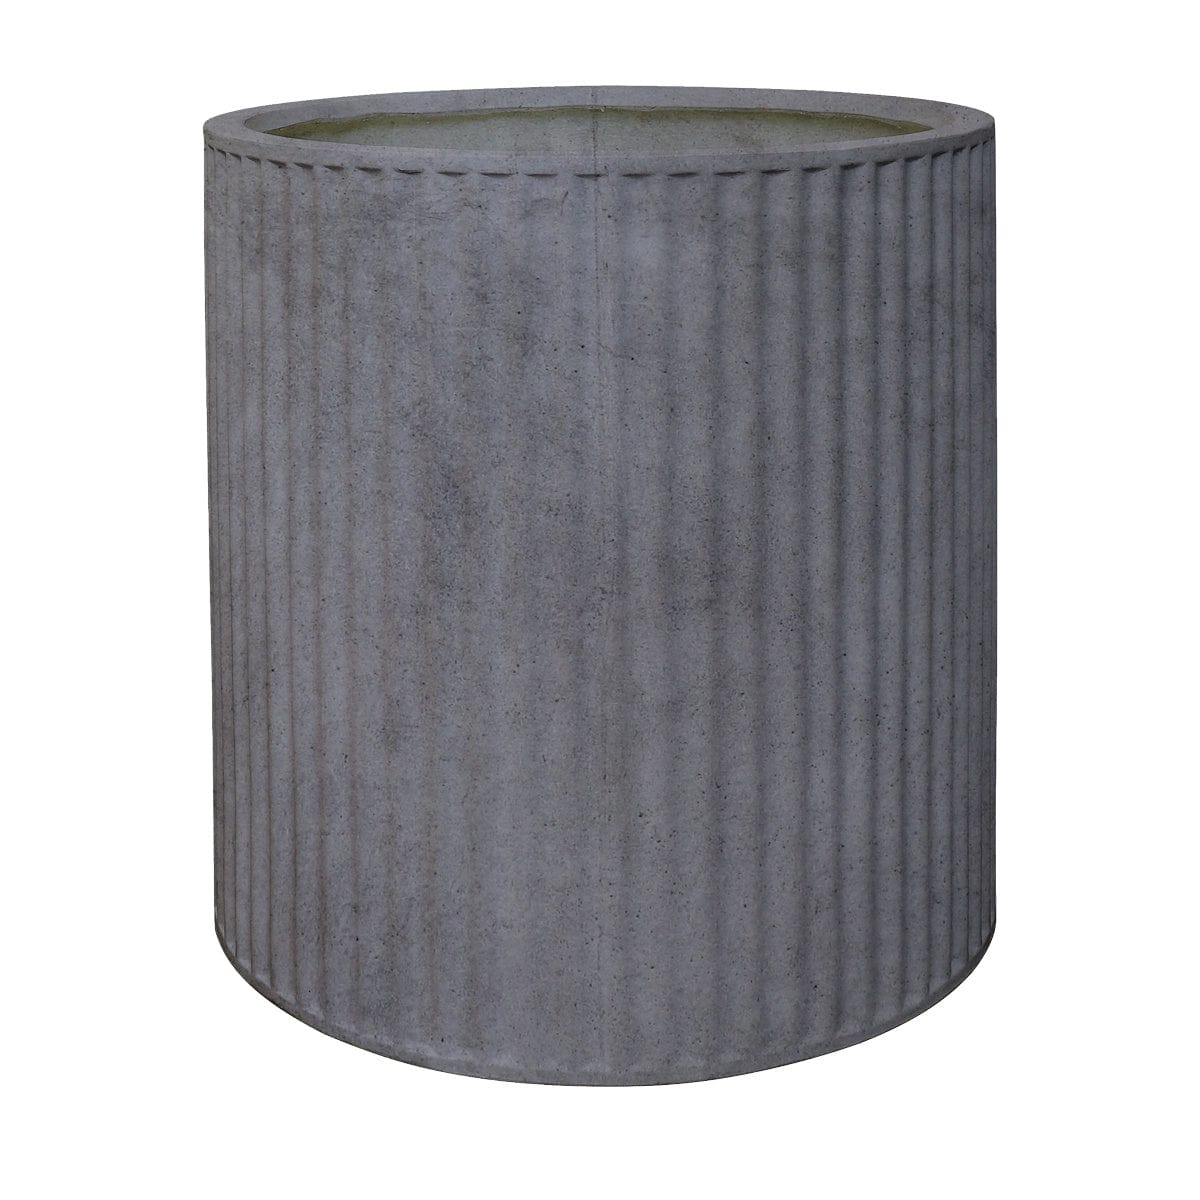 Piako Ribbed Cylinder Planter Large - Weathered Cement PRE ORDER LITTLE & FOX